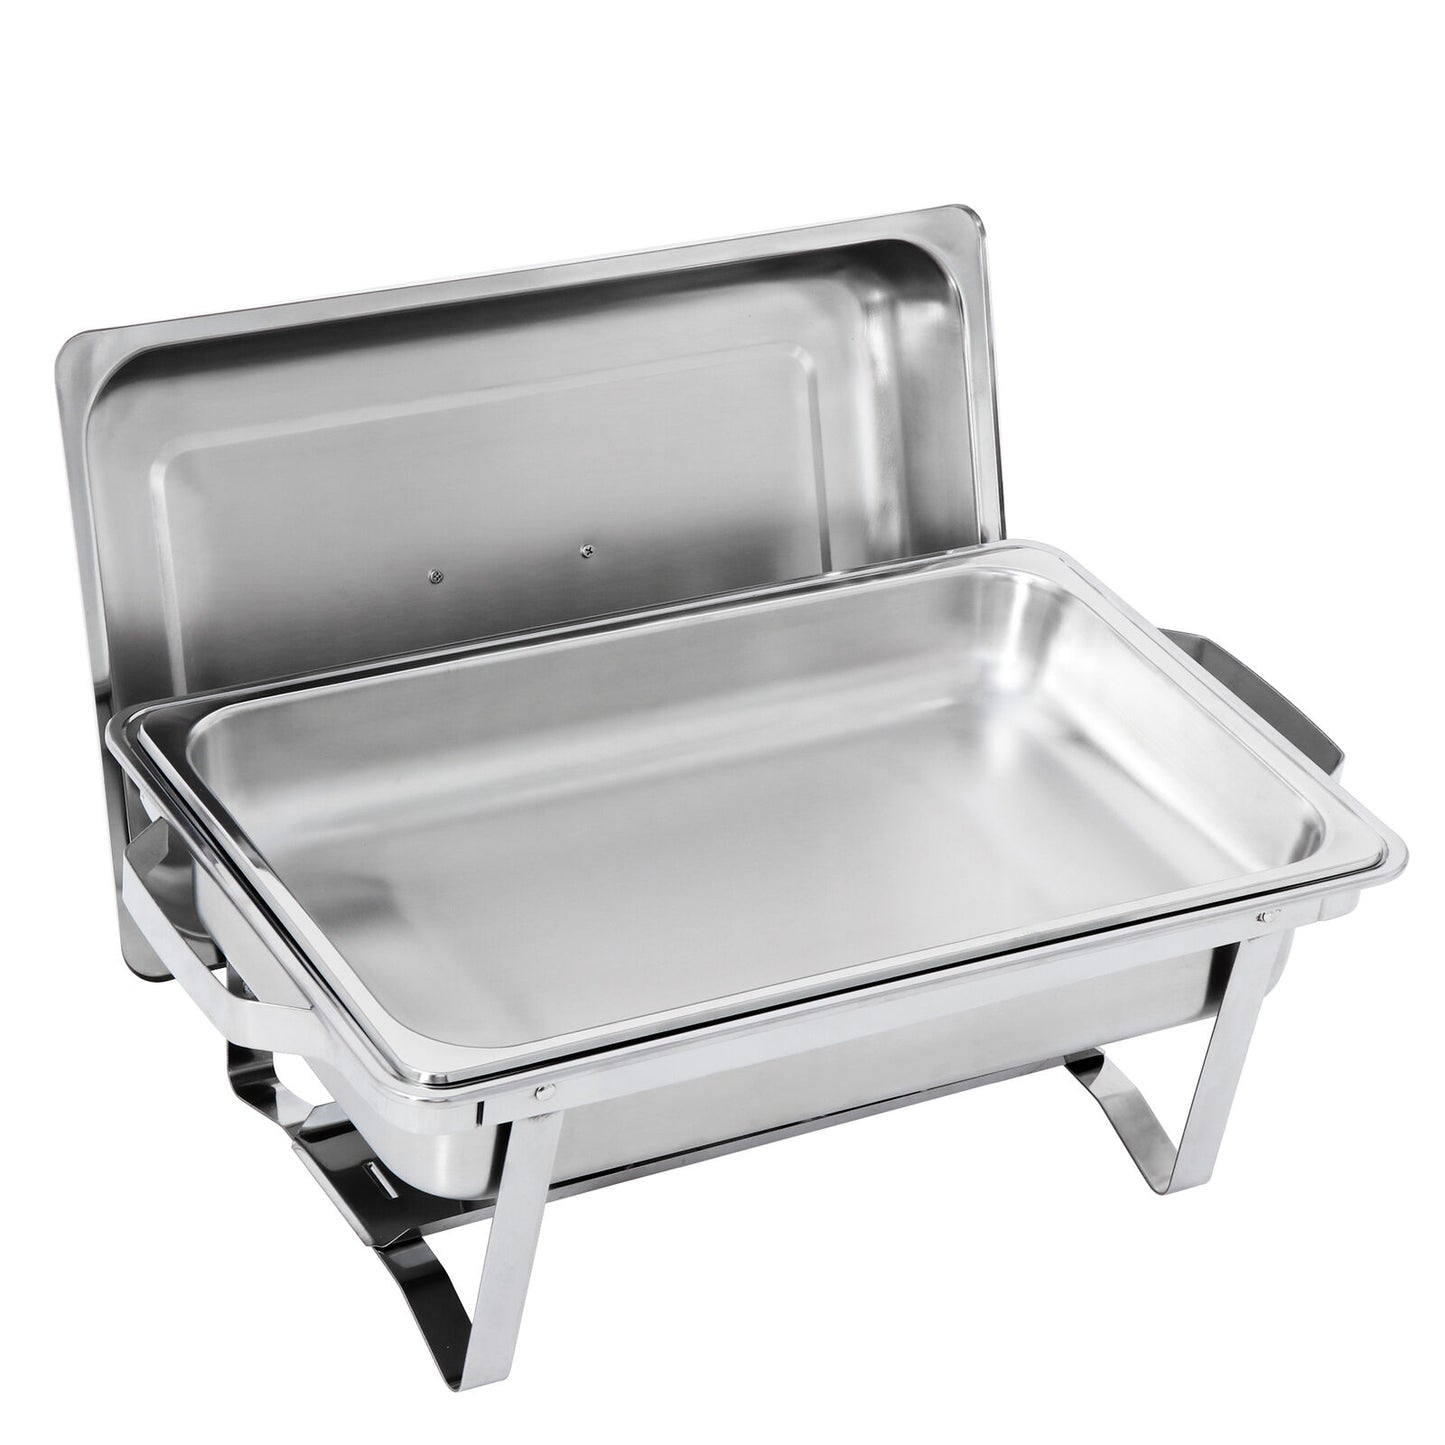 8 Pack 8QT Chafing Dish Stainless Steel Chafer Complete Set with 2 Warmer